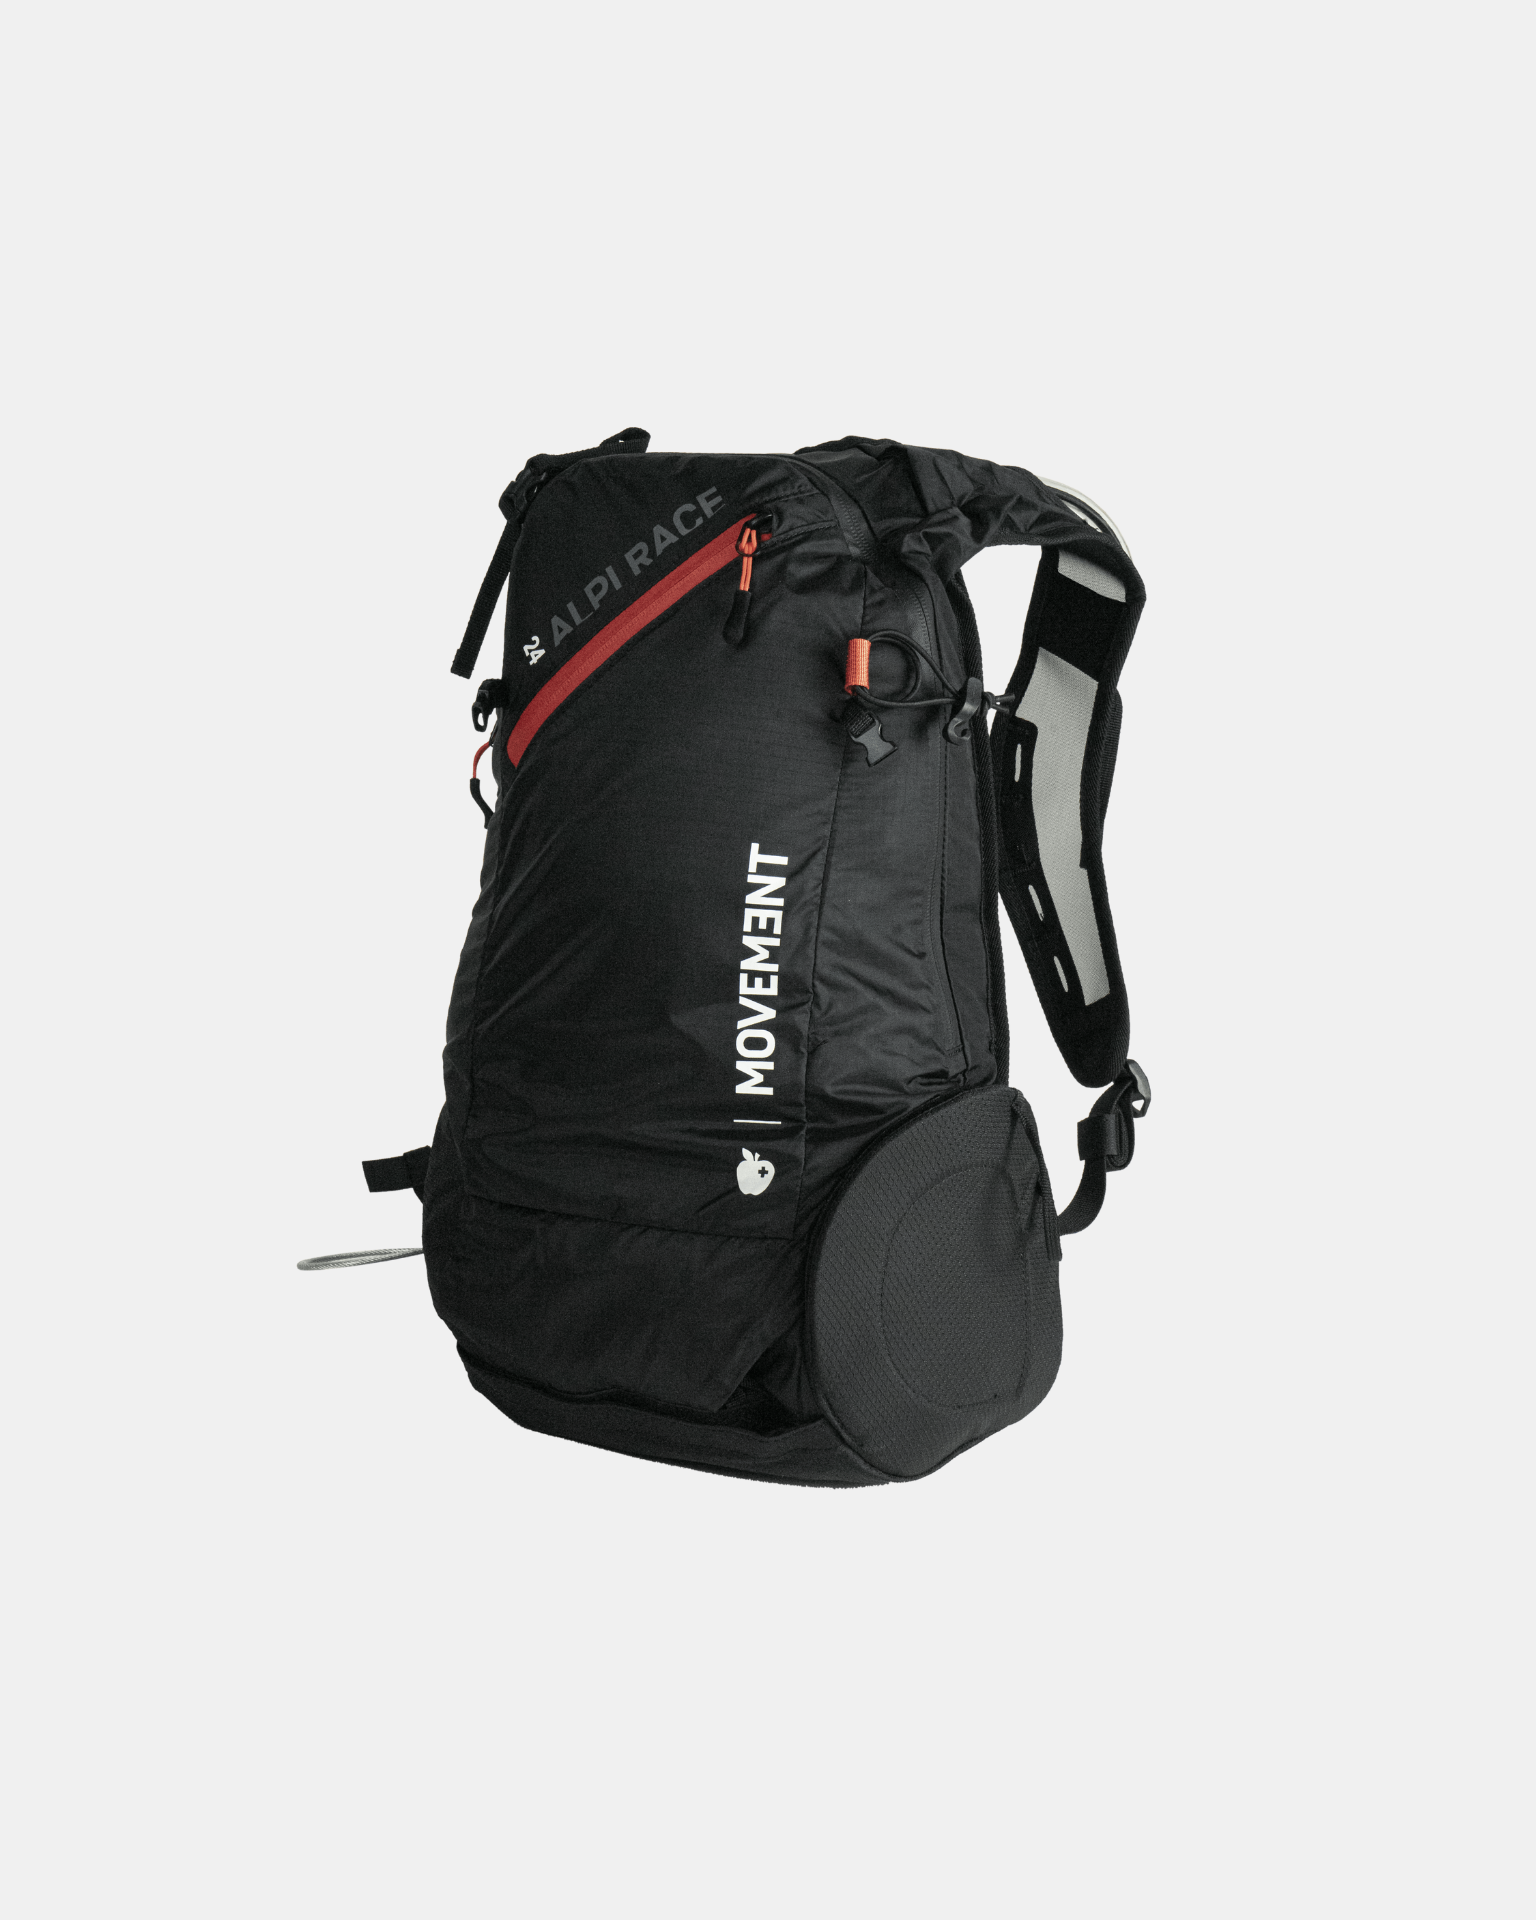 Optimize your speed touring experience with Movement&#39;s Alpi Race backpack.